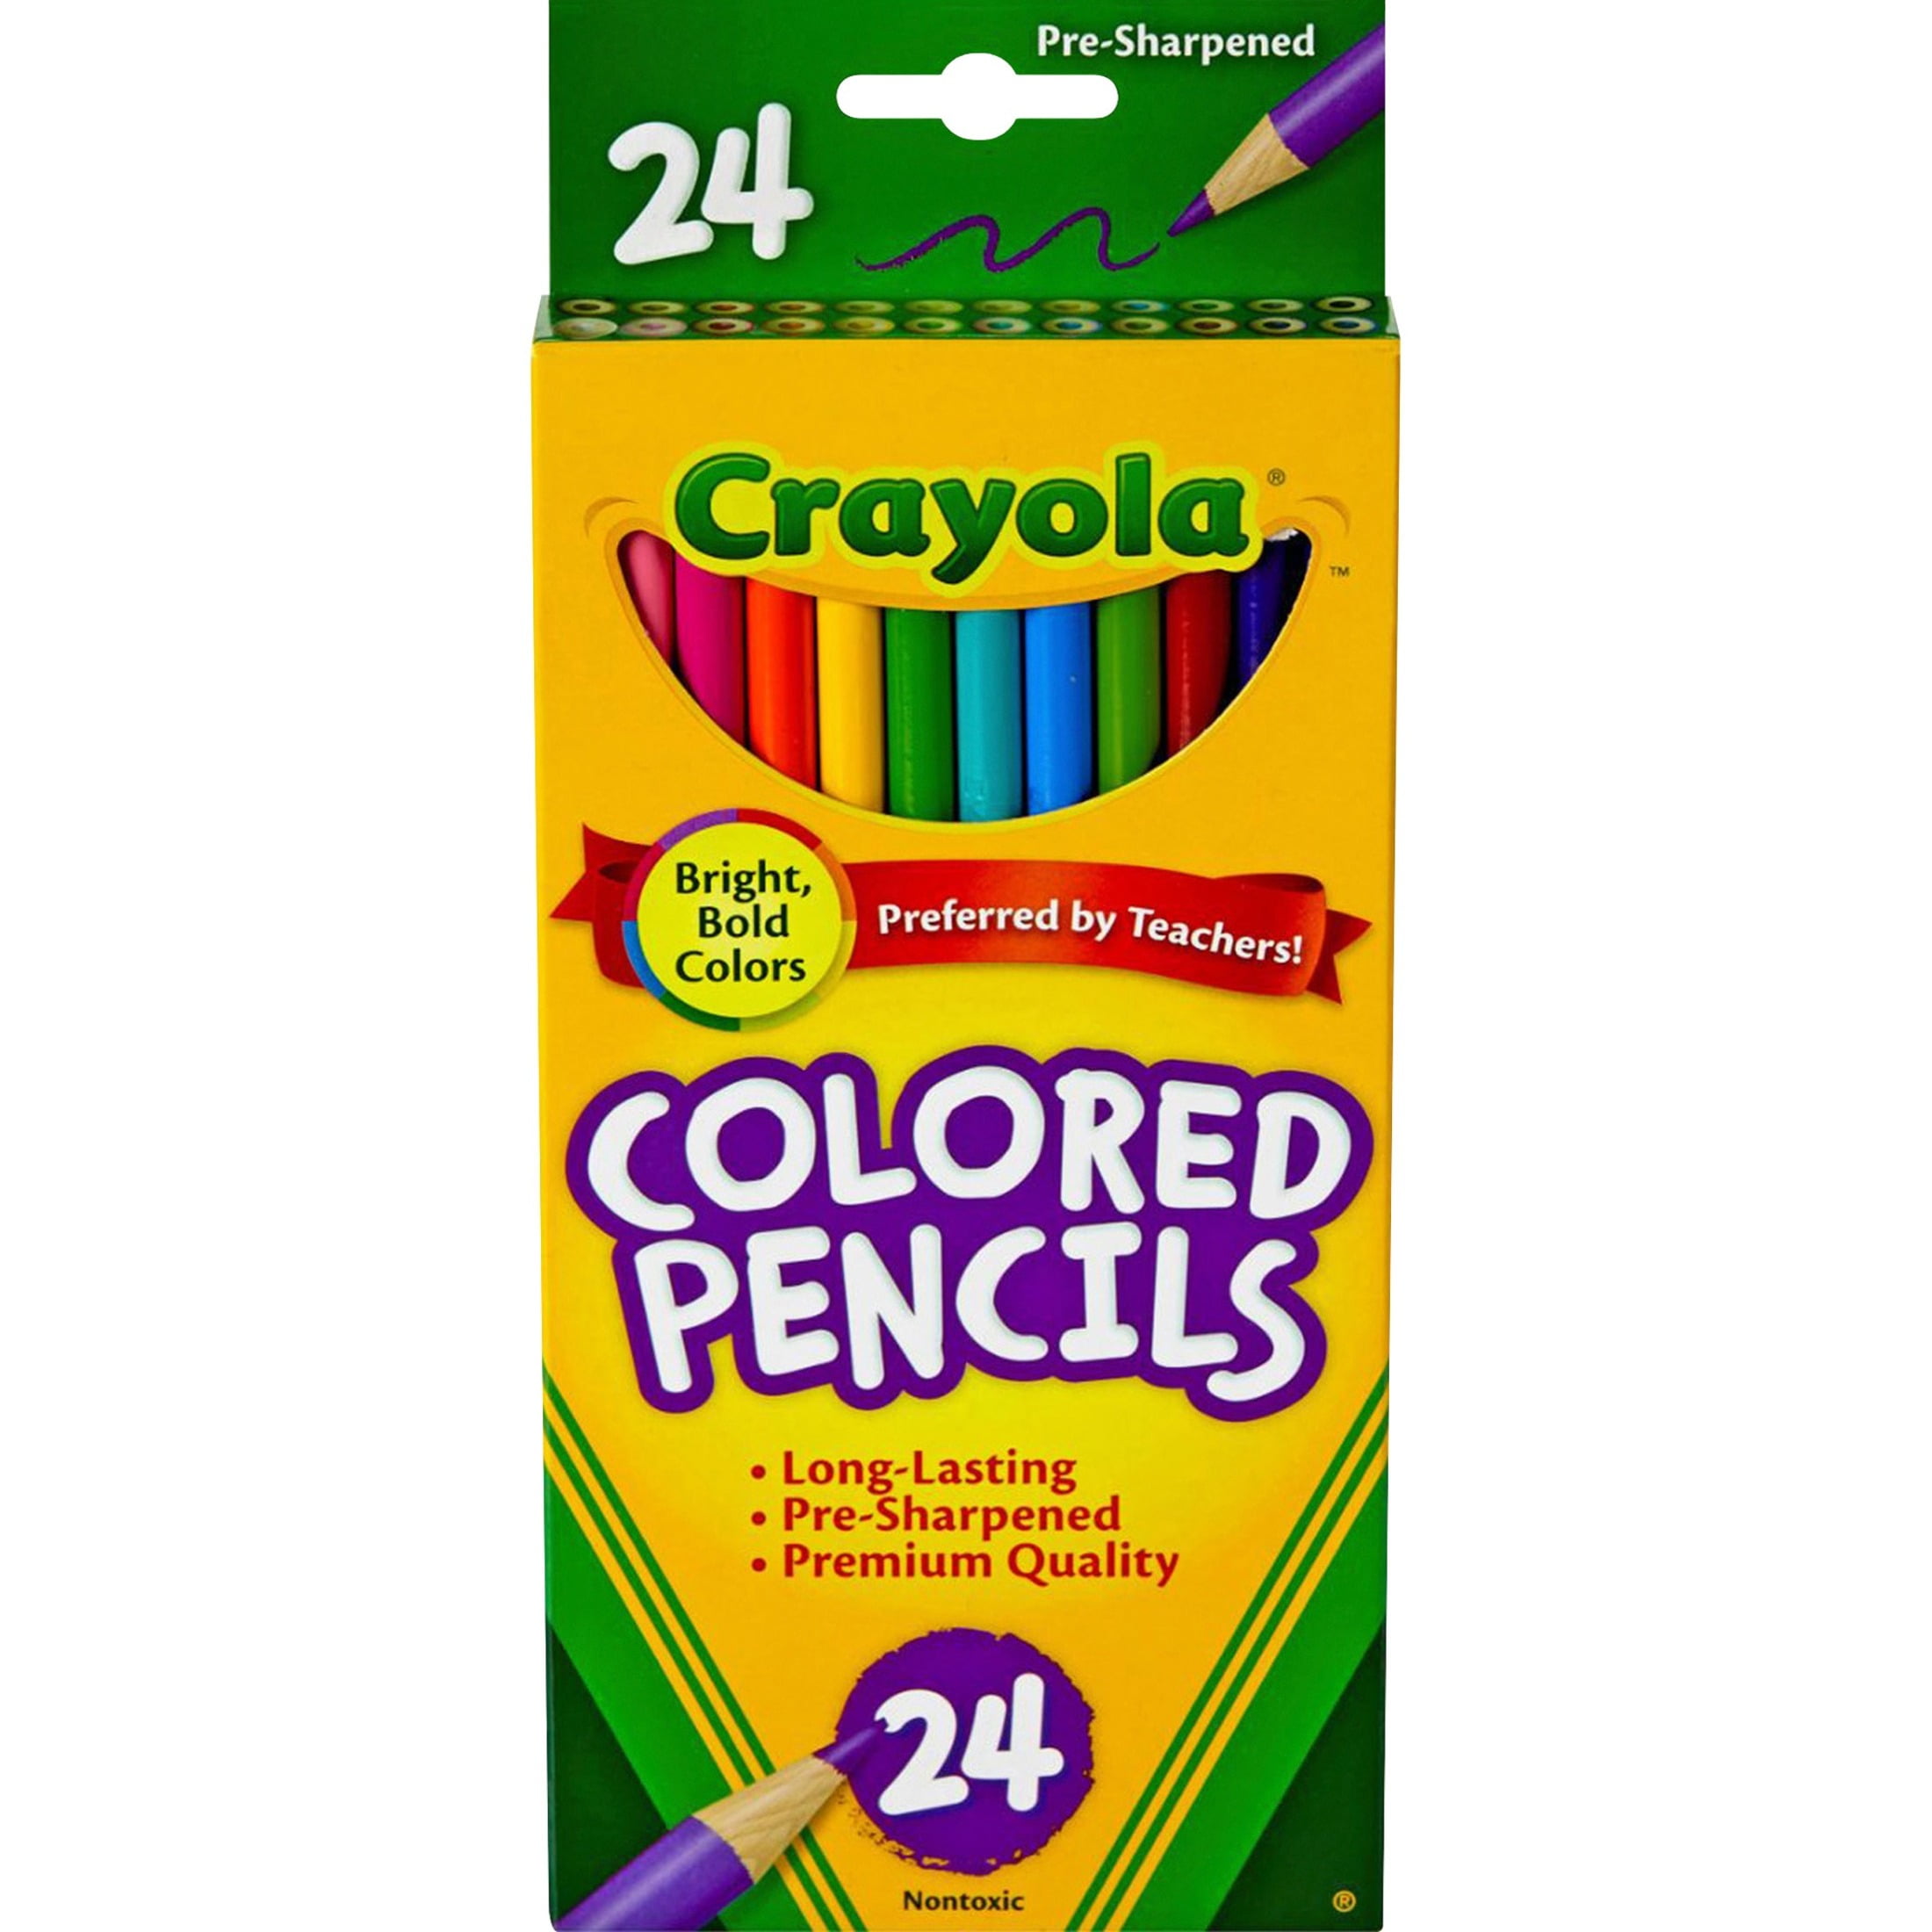 Crayola 24ct Crayons - Colors Of The World : Target